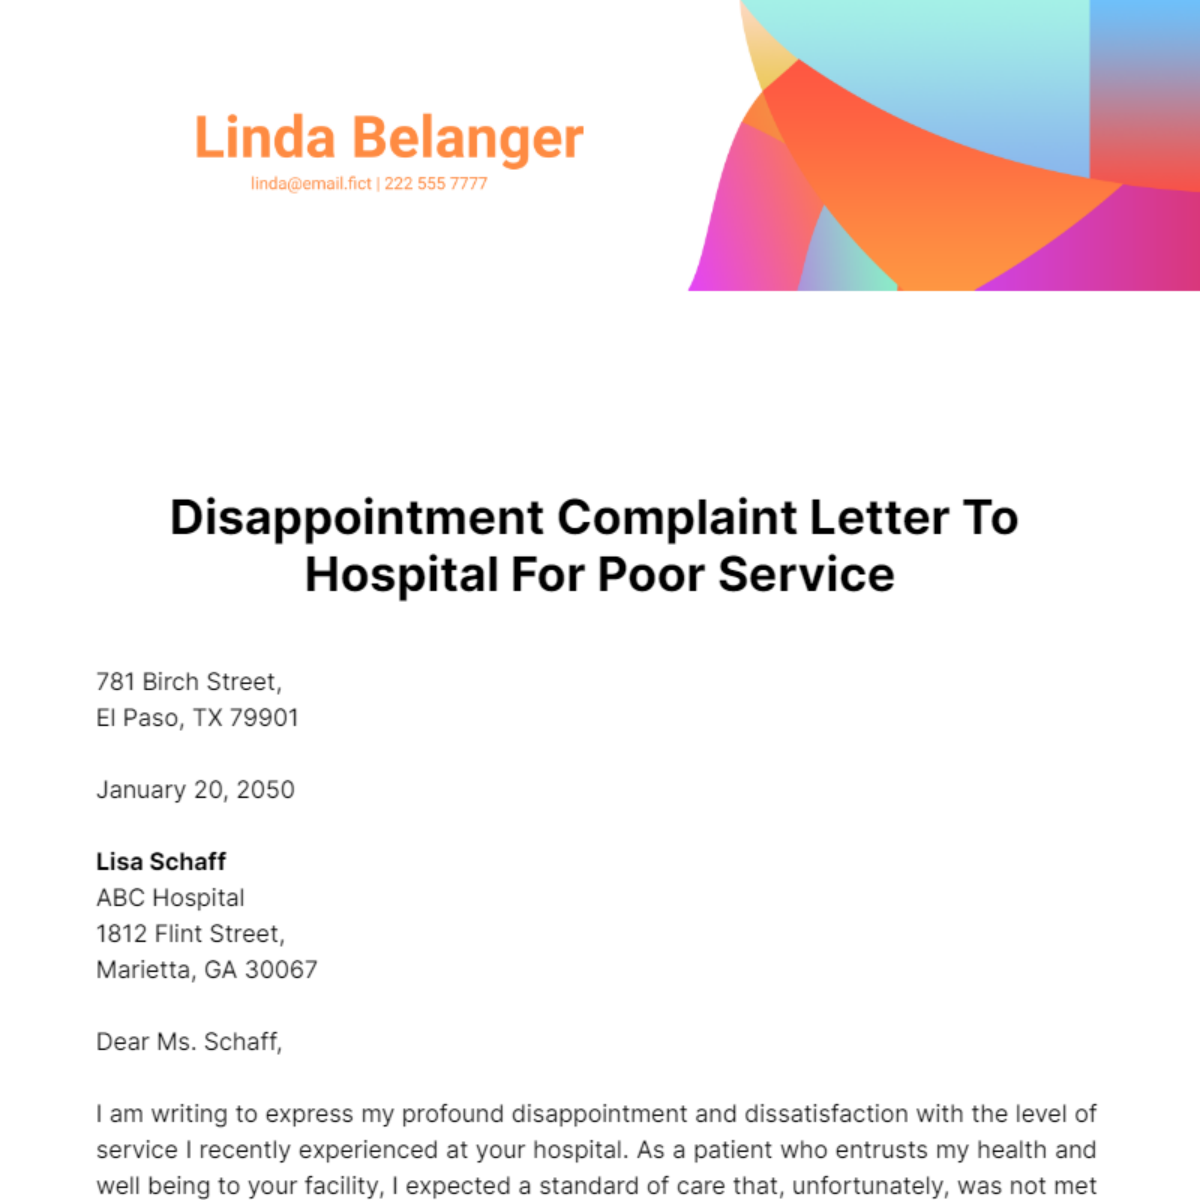 Disappointment Complaint Letter to Hospital for Poor Service Template